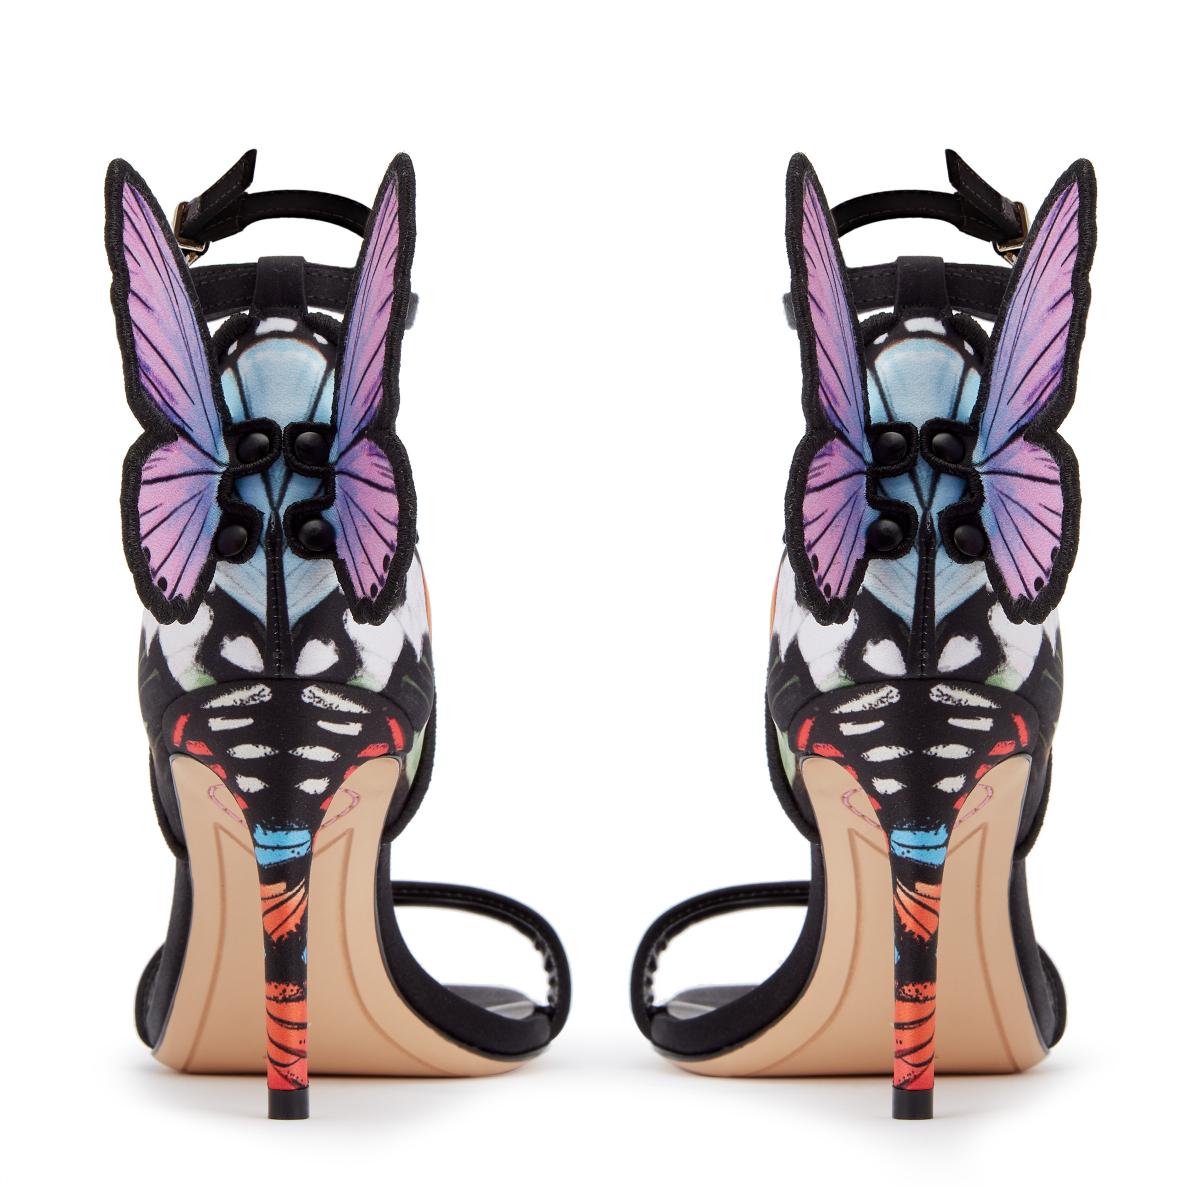 Chiara Embroidery Mid Sandal Midnight Butterfly